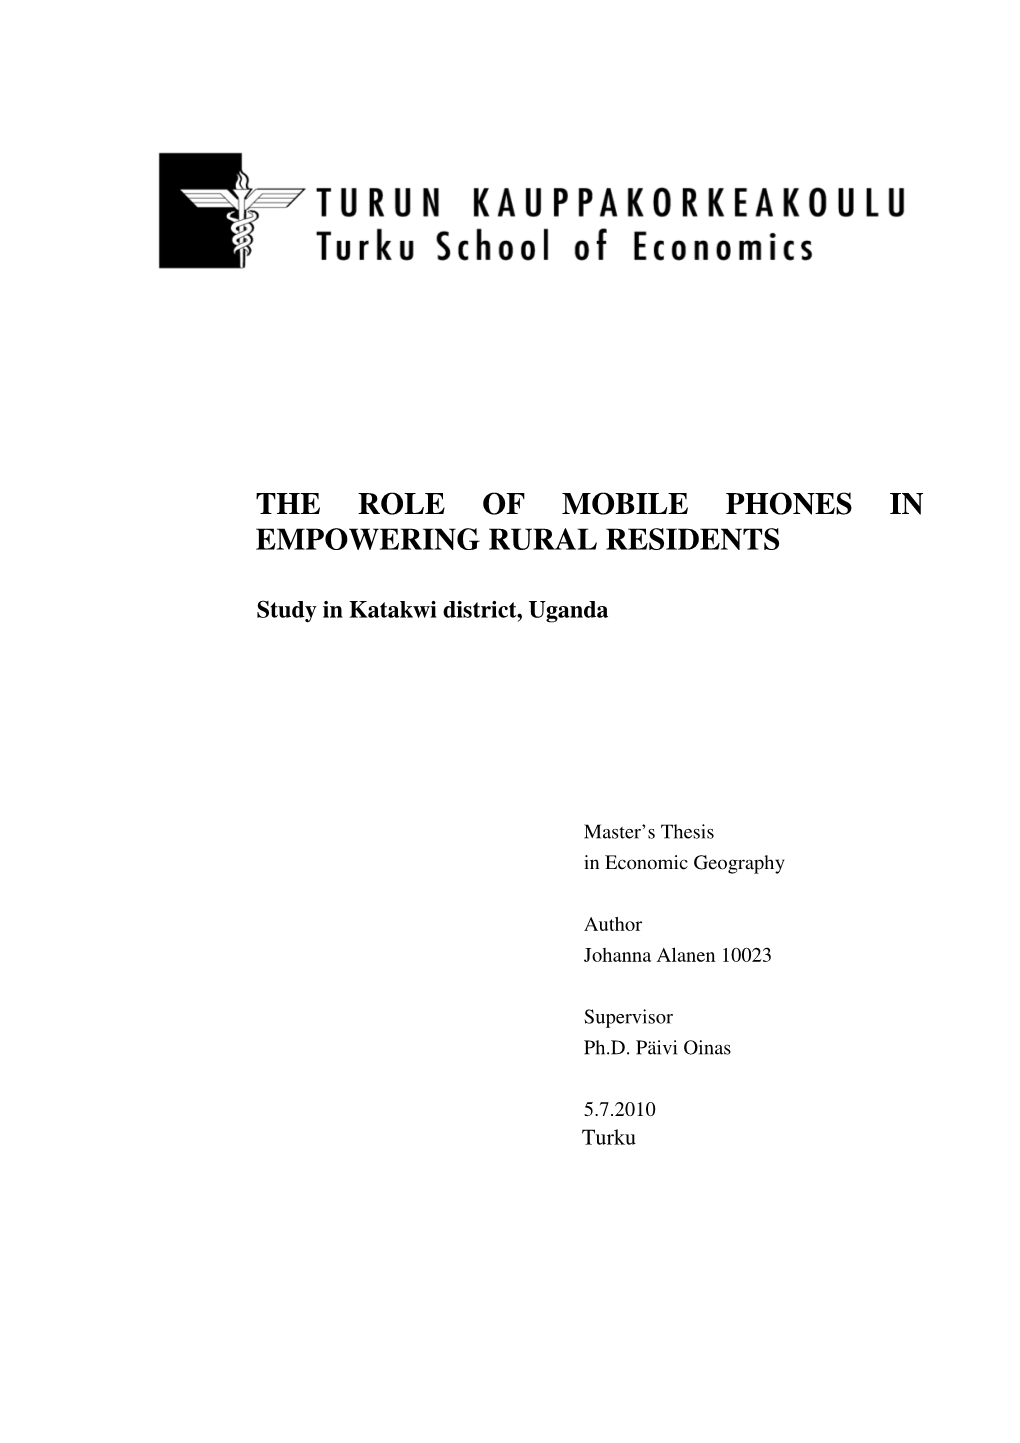 The Role of Mobile Phones in Empowering Rural Residents